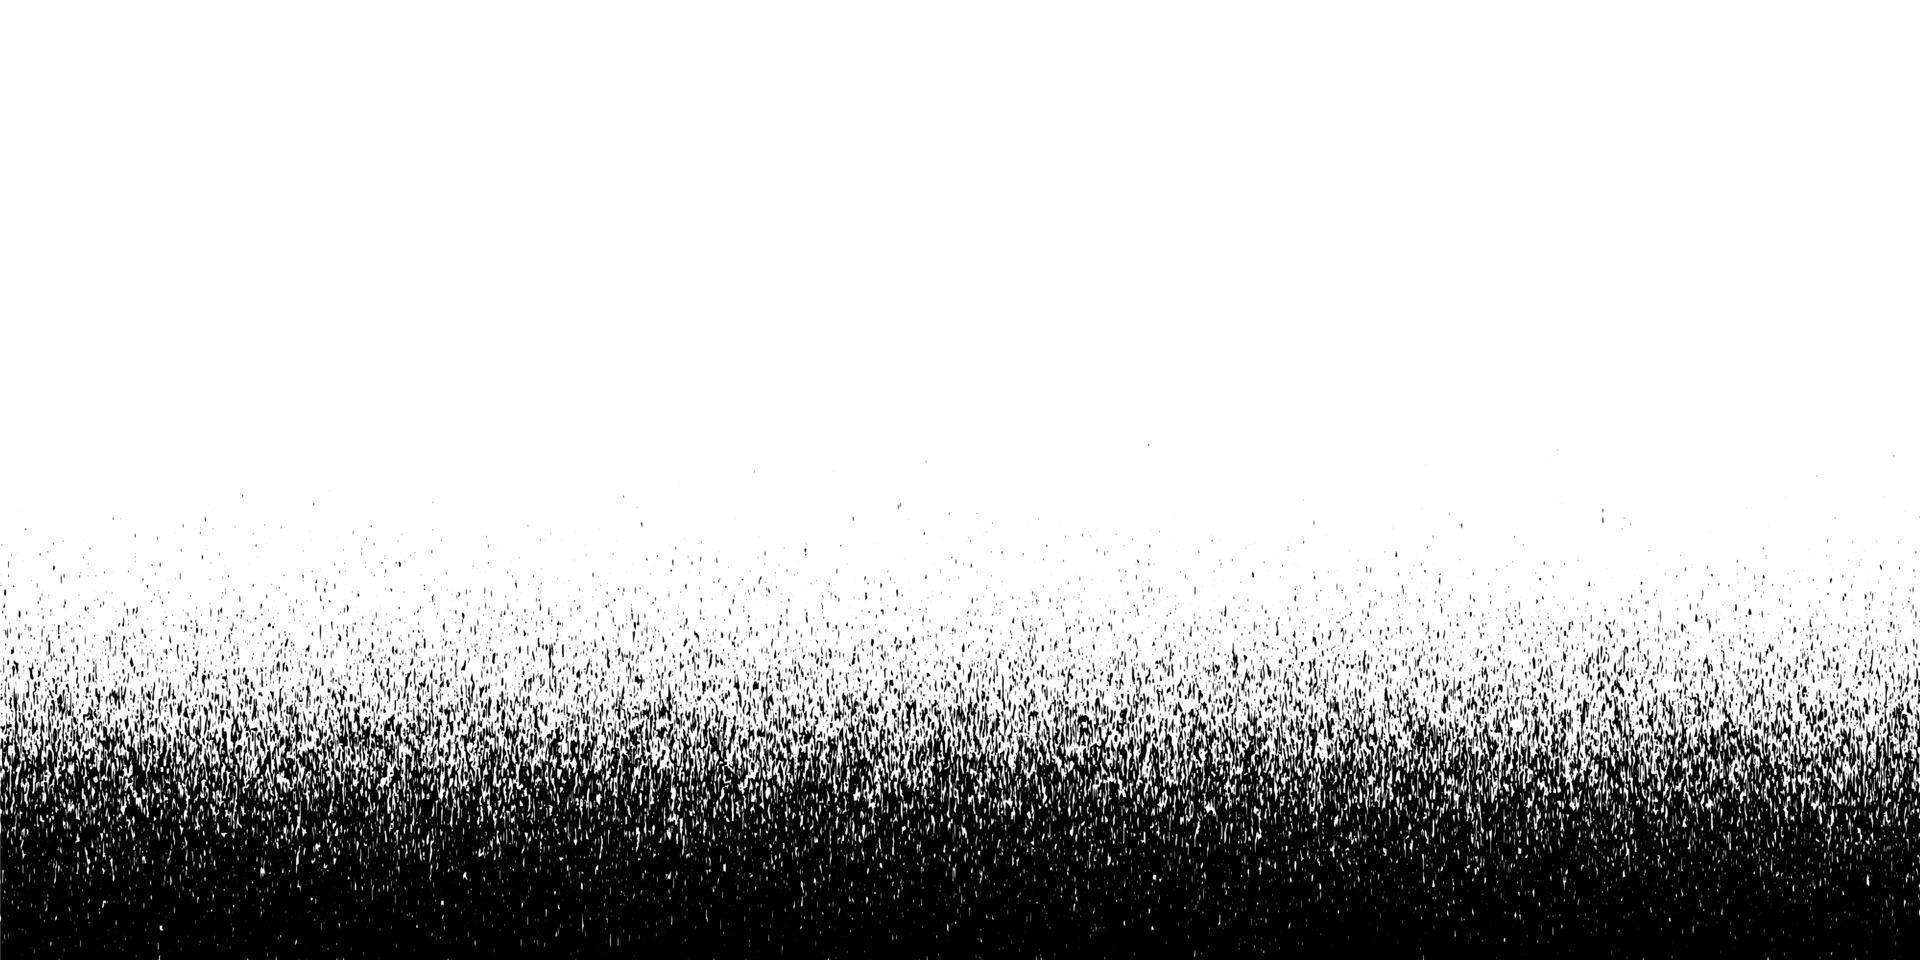 Grain noise texture background, grunge gradient, dirty distressed effect. vector